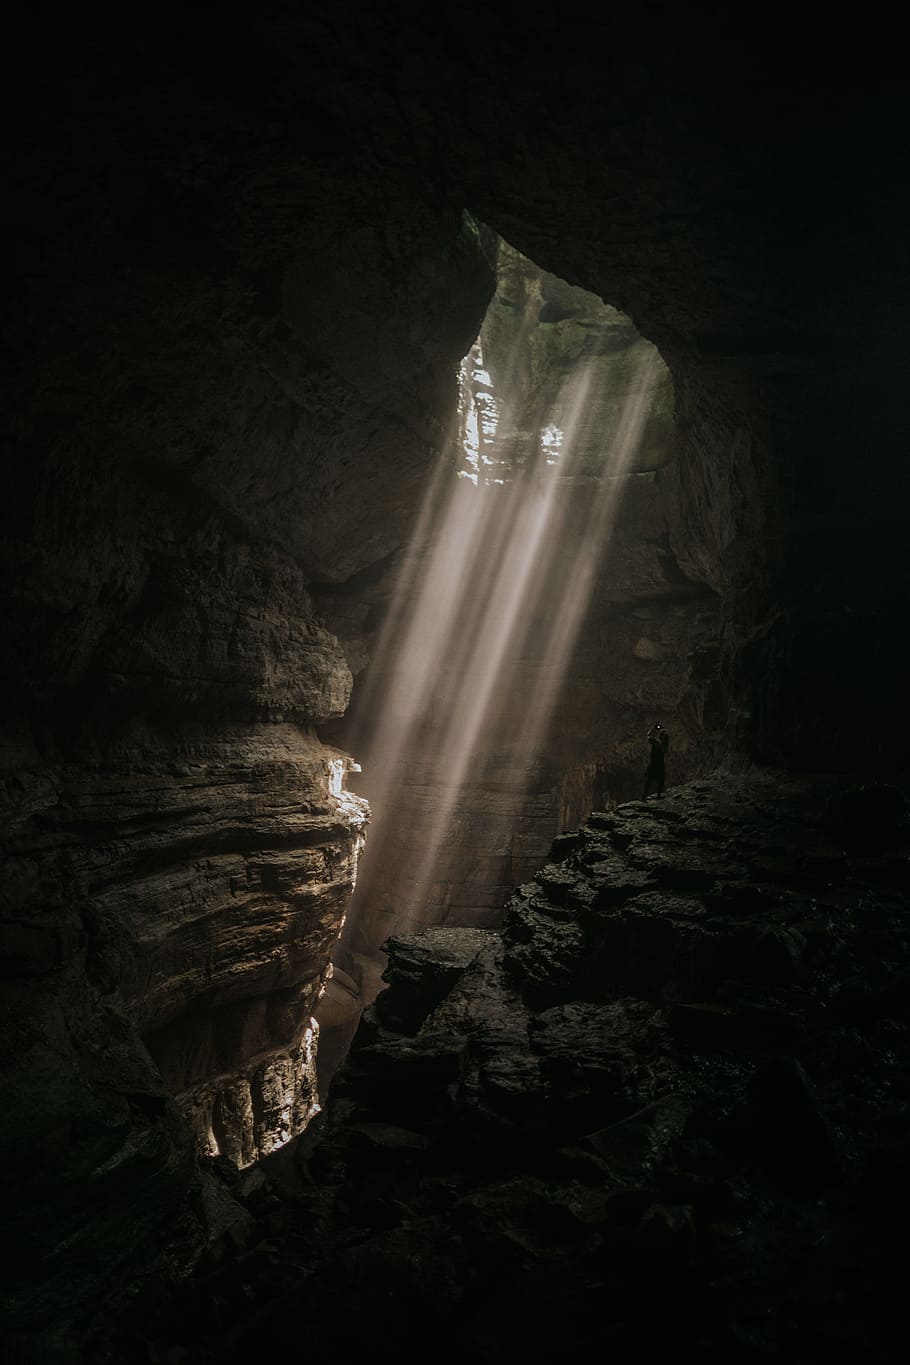 brown cave, ray, beam, light, hole, girl, person, taking photo